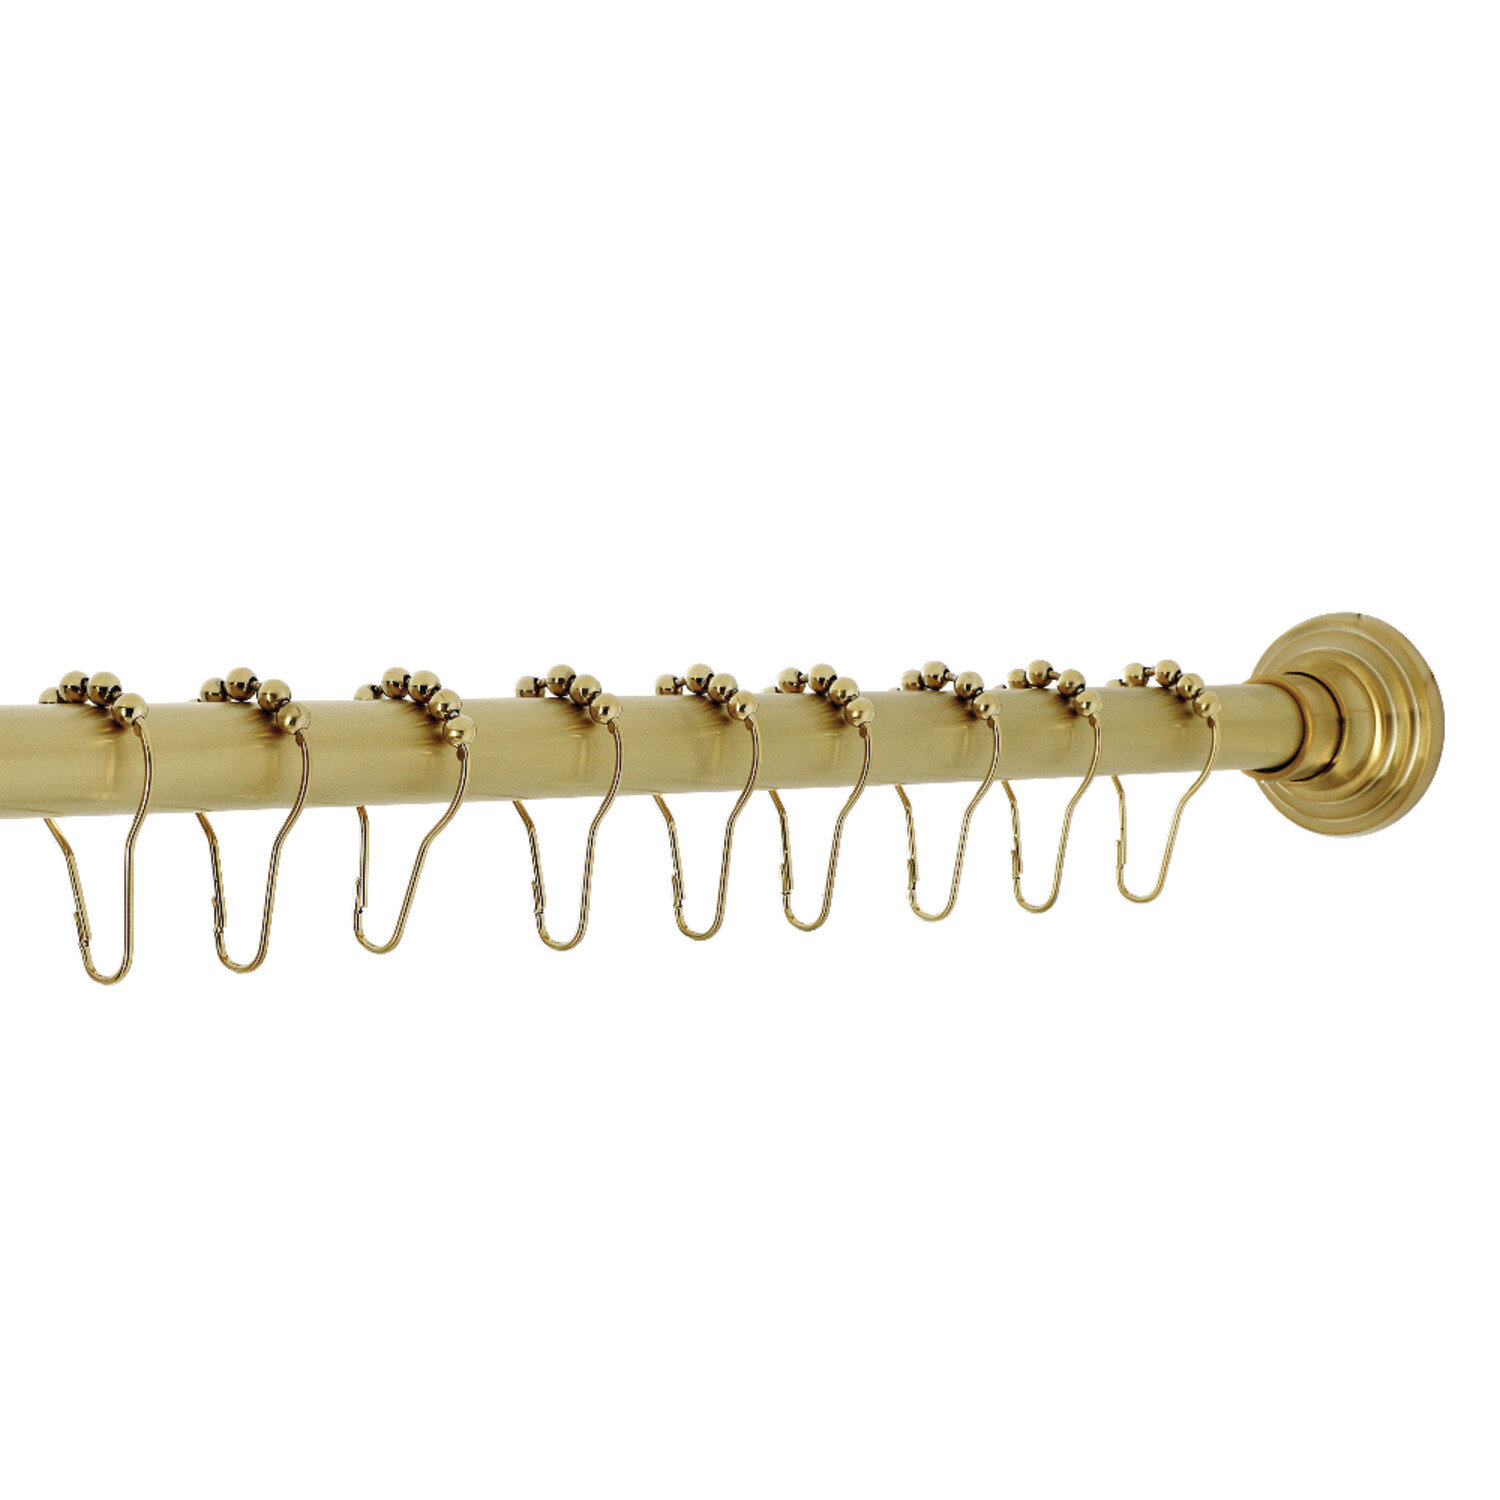 Kingston Brass SRK607 72 in. Edenscape Adjustable Shower Curtain Rod with Rings, Brushed Brass